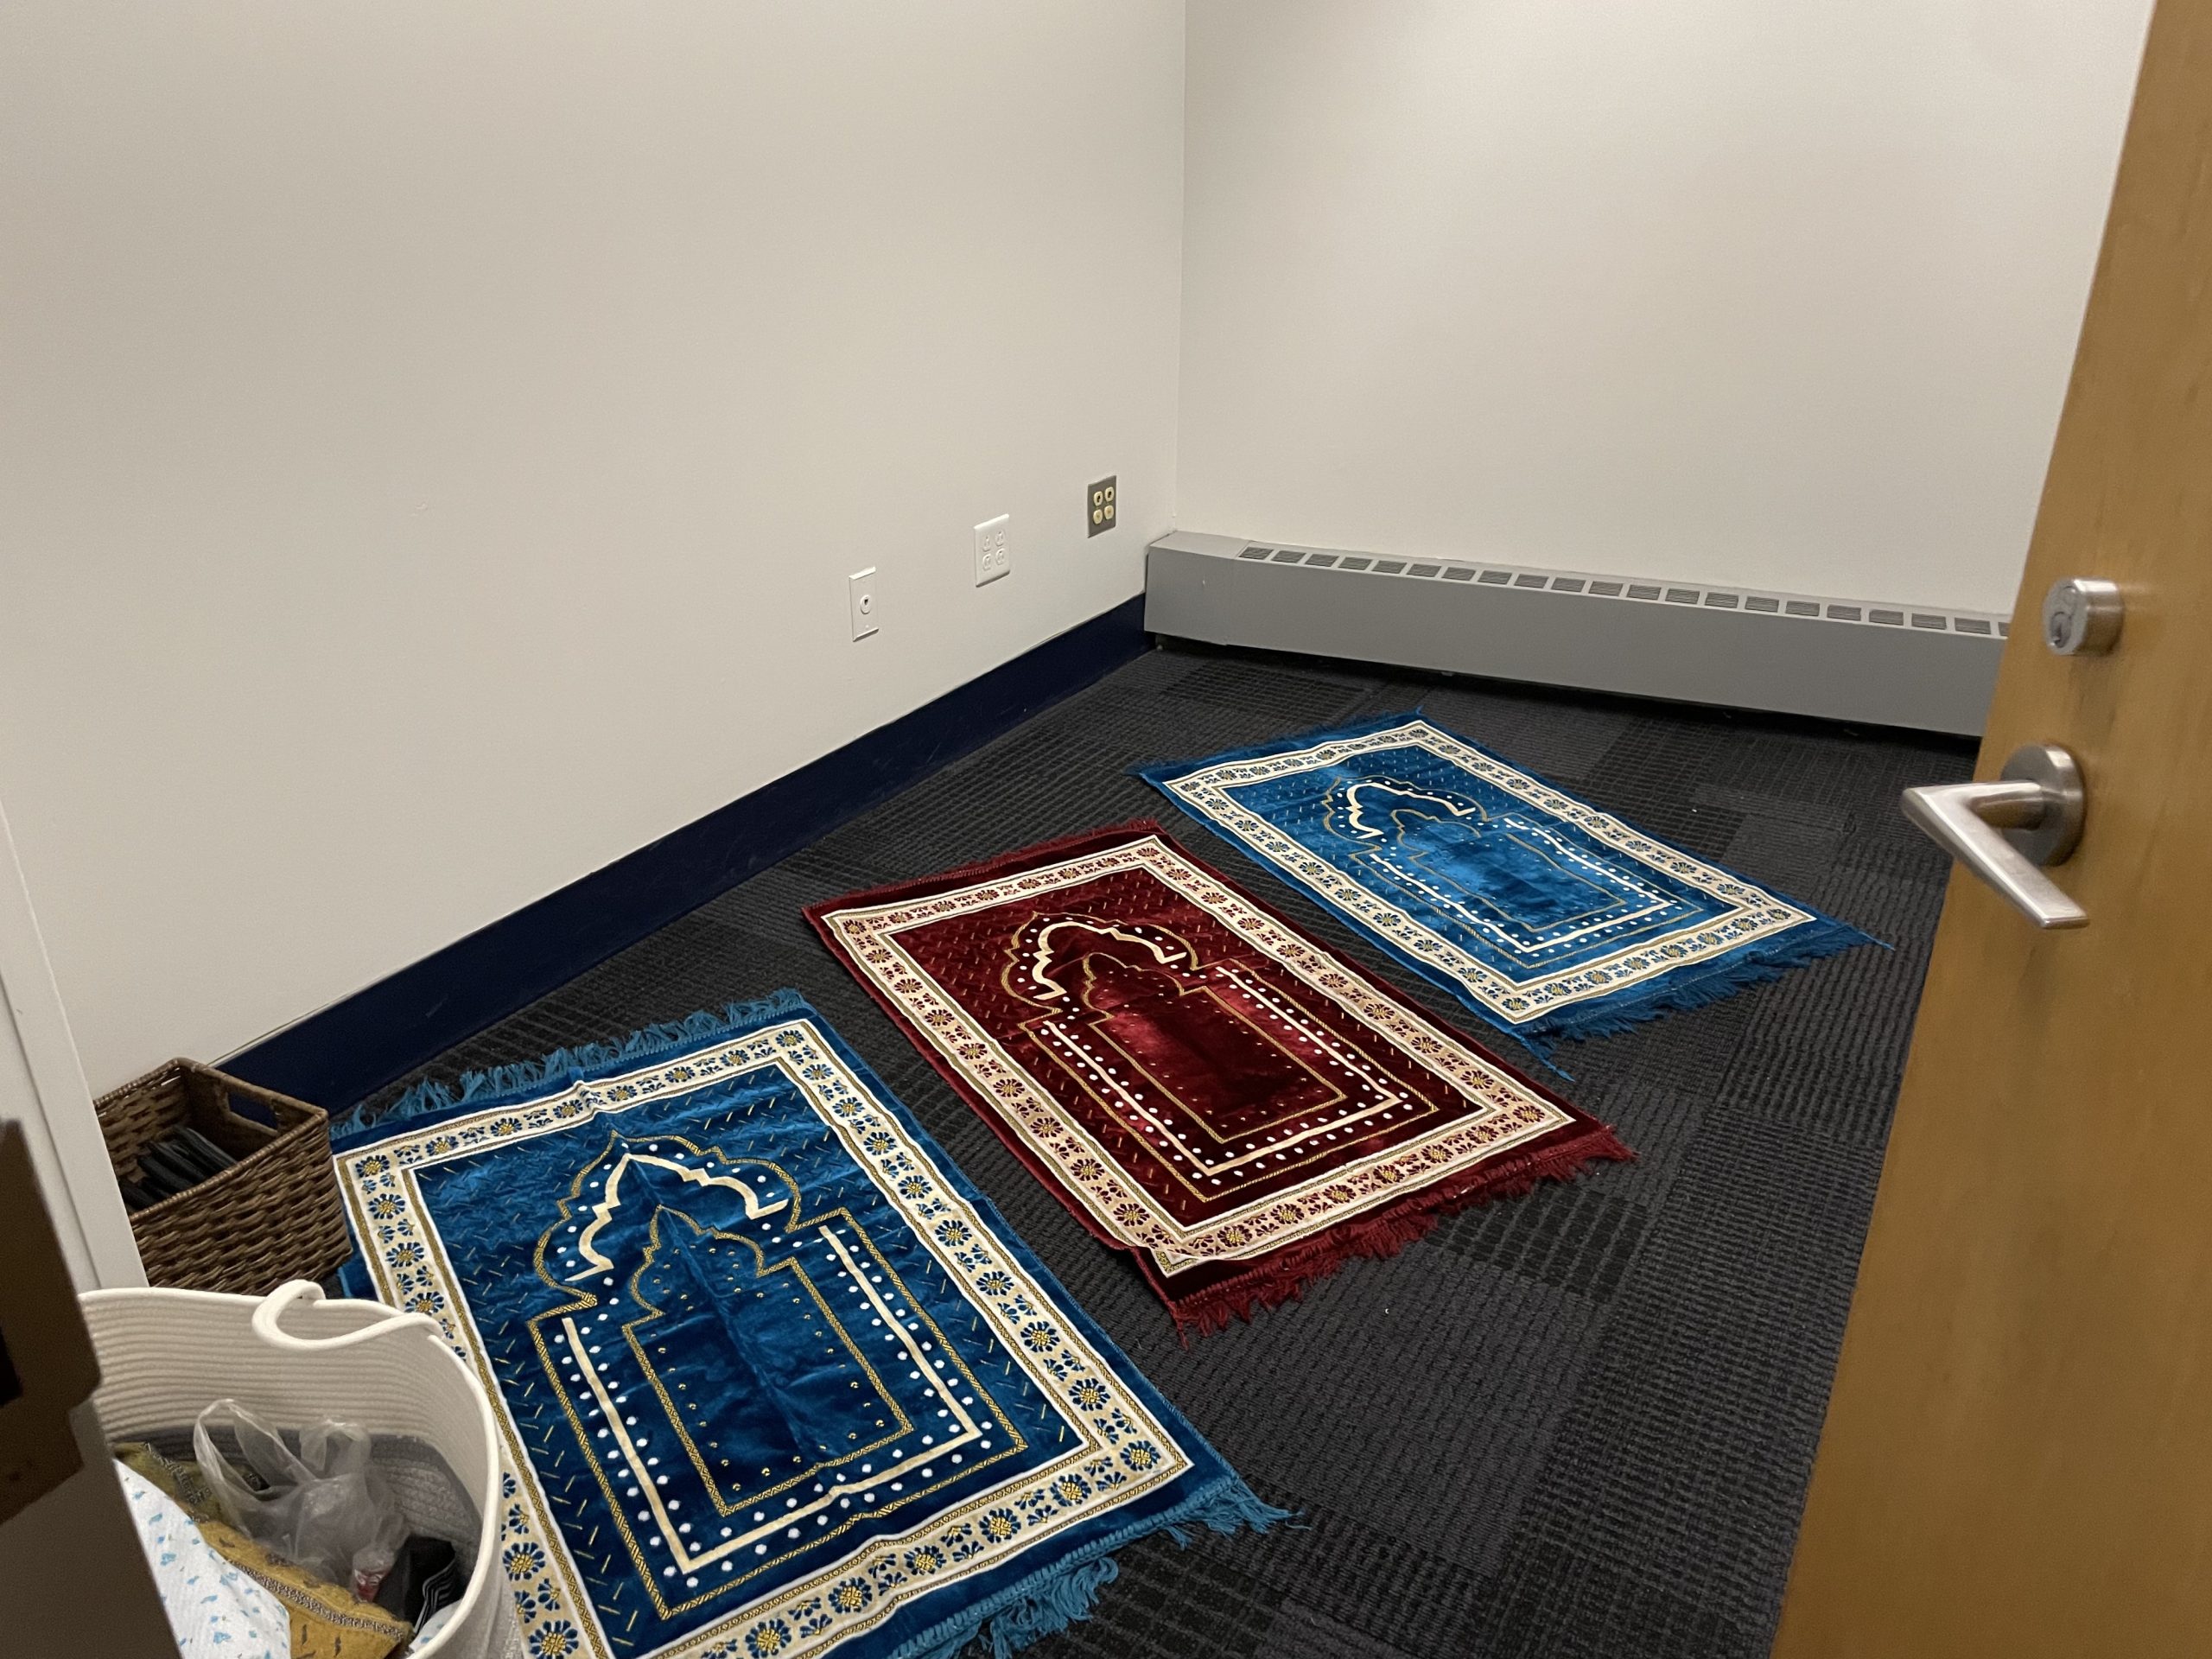 3 prayer rugs in a small room